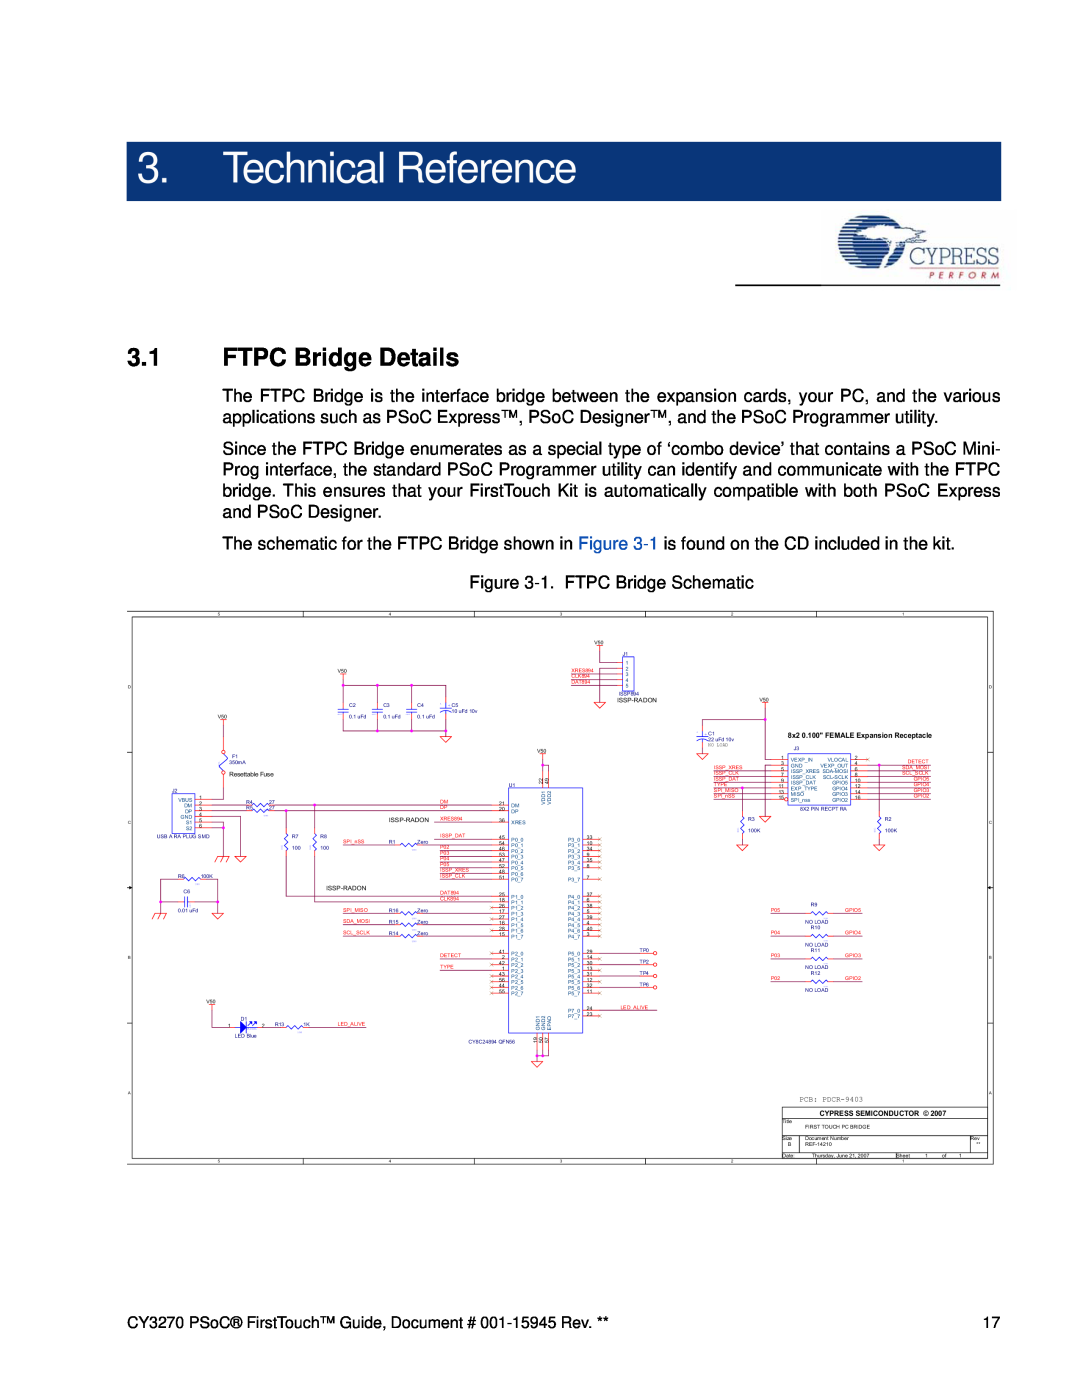 Cypress CY3270 manual Technical Reference, FTPC Bridge Details 